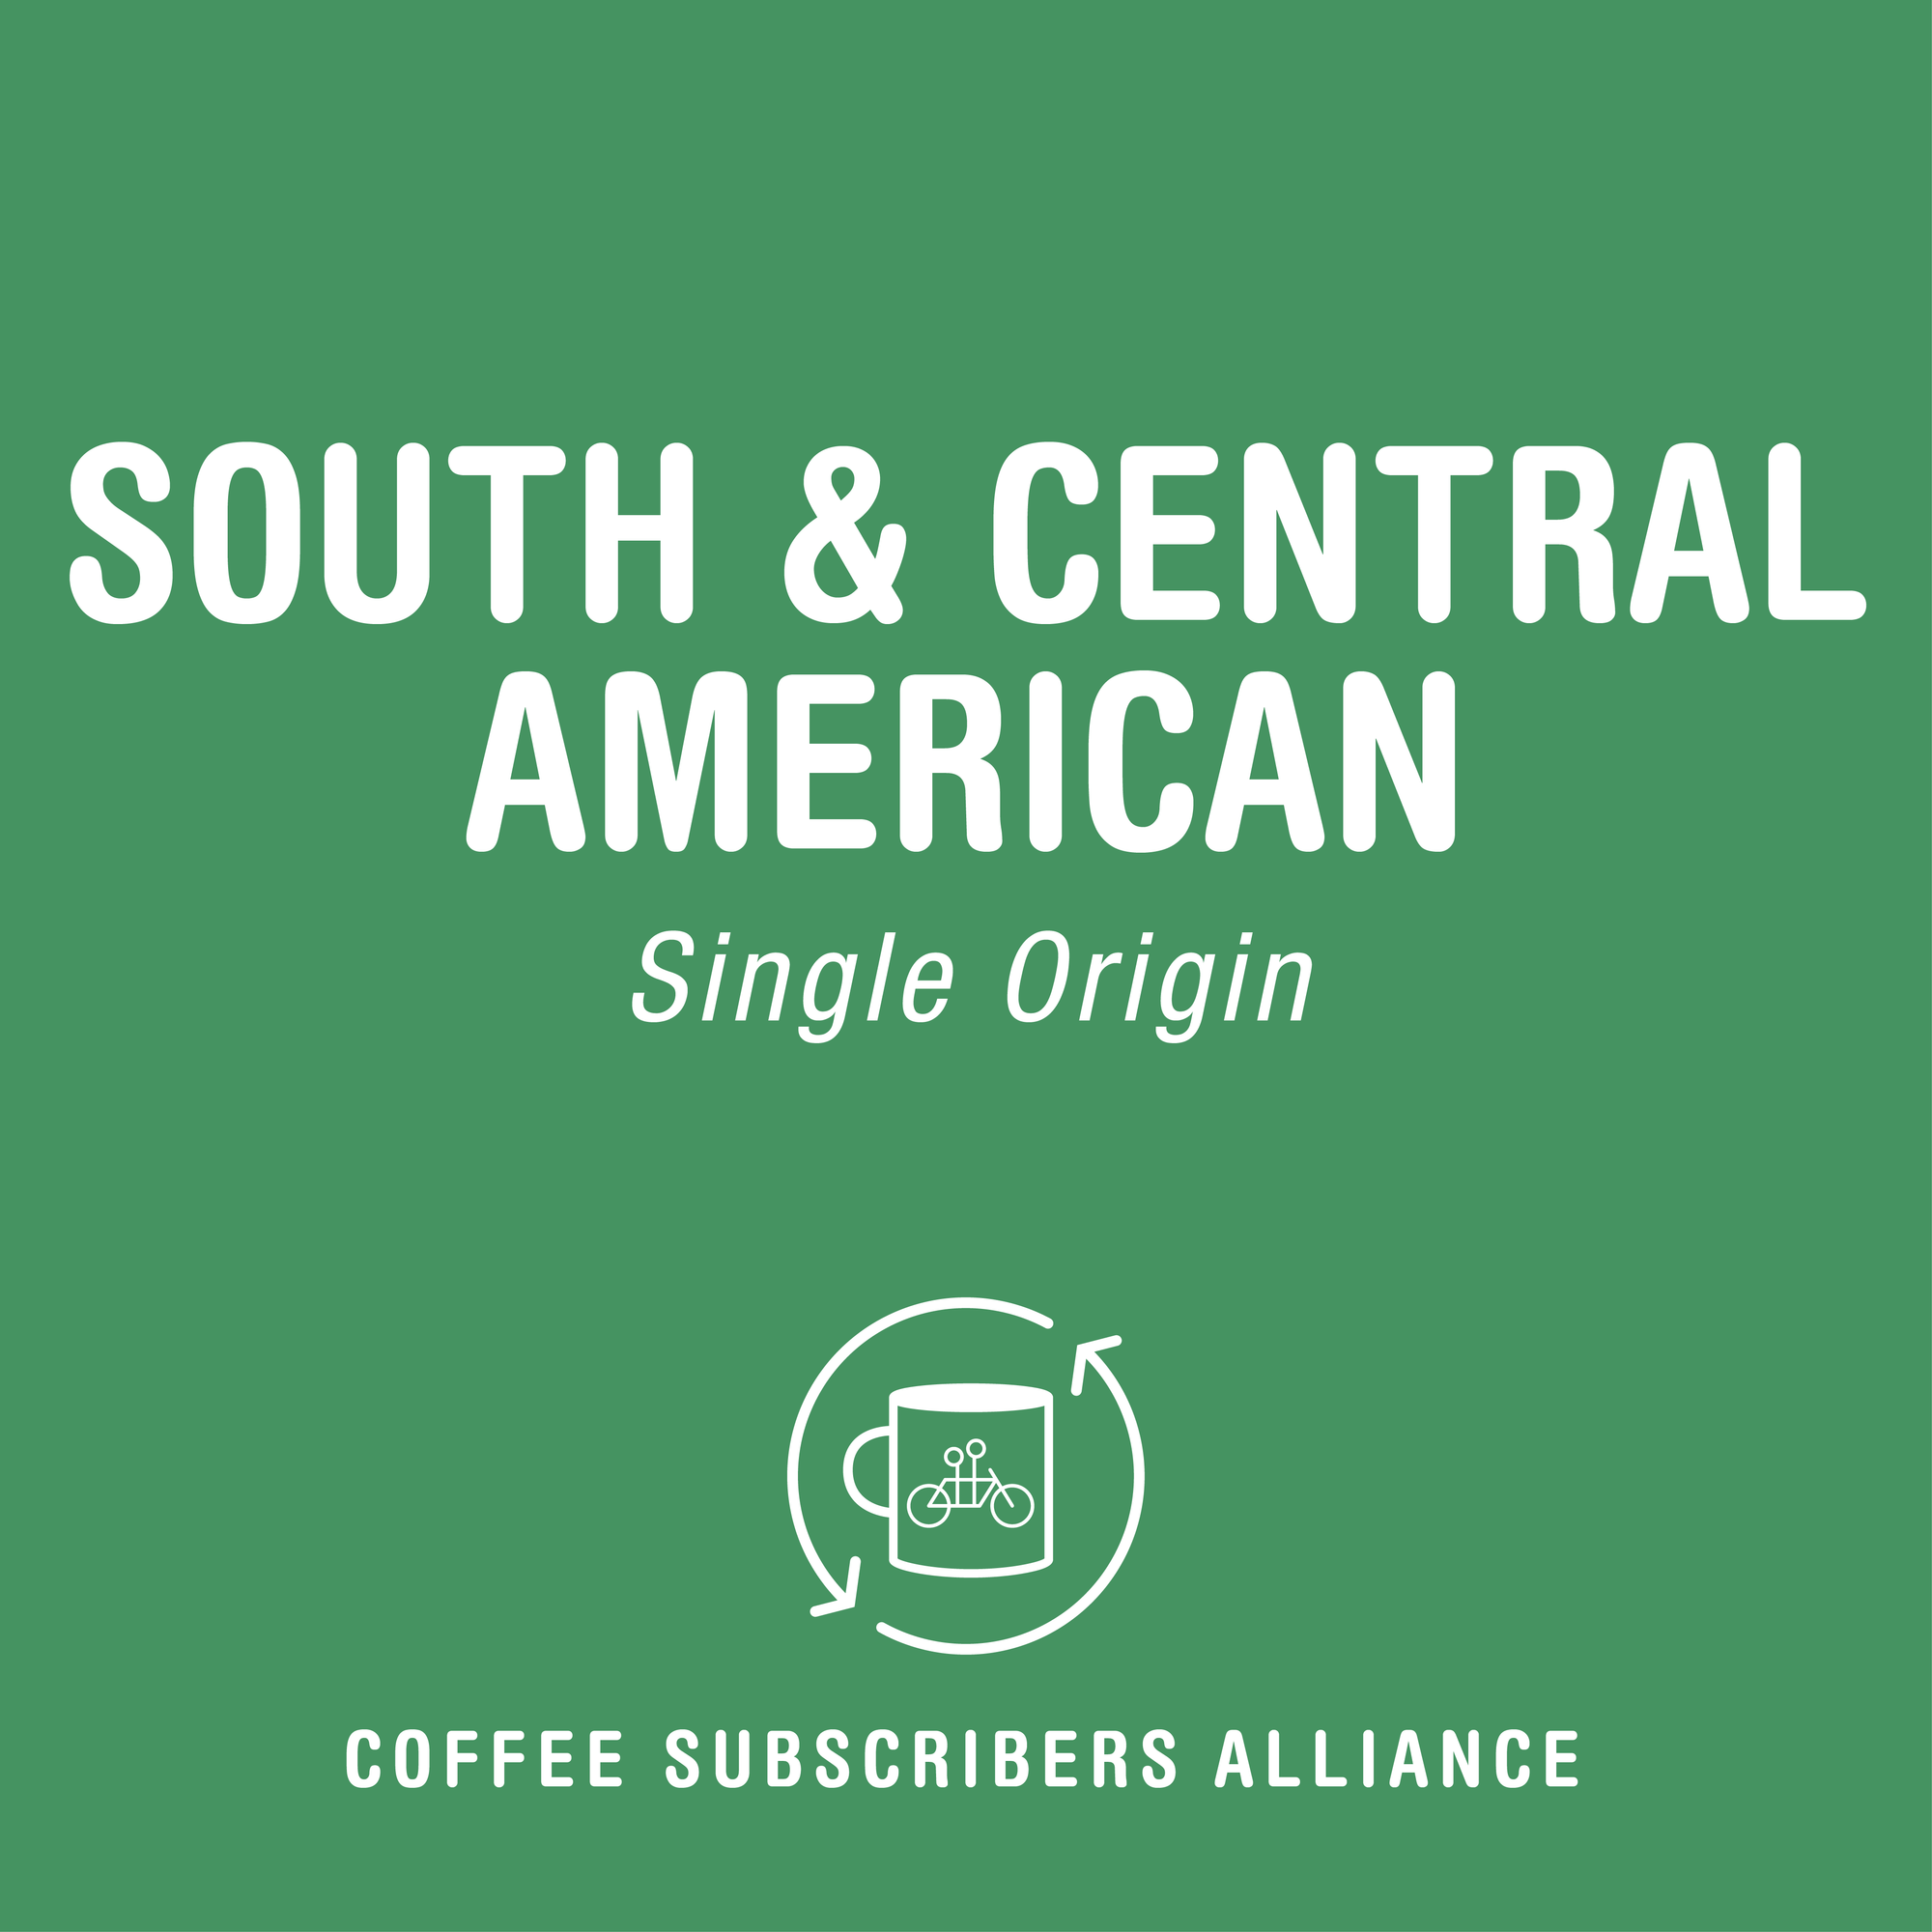 Logo of Tandem Coffee Roasters' South & Central American Subscription Gift - 8 Weeks x 12 featuring text "south & central american single origin" with a circular emblem with a coffee cup and coffee bean in the center, set against a green background.